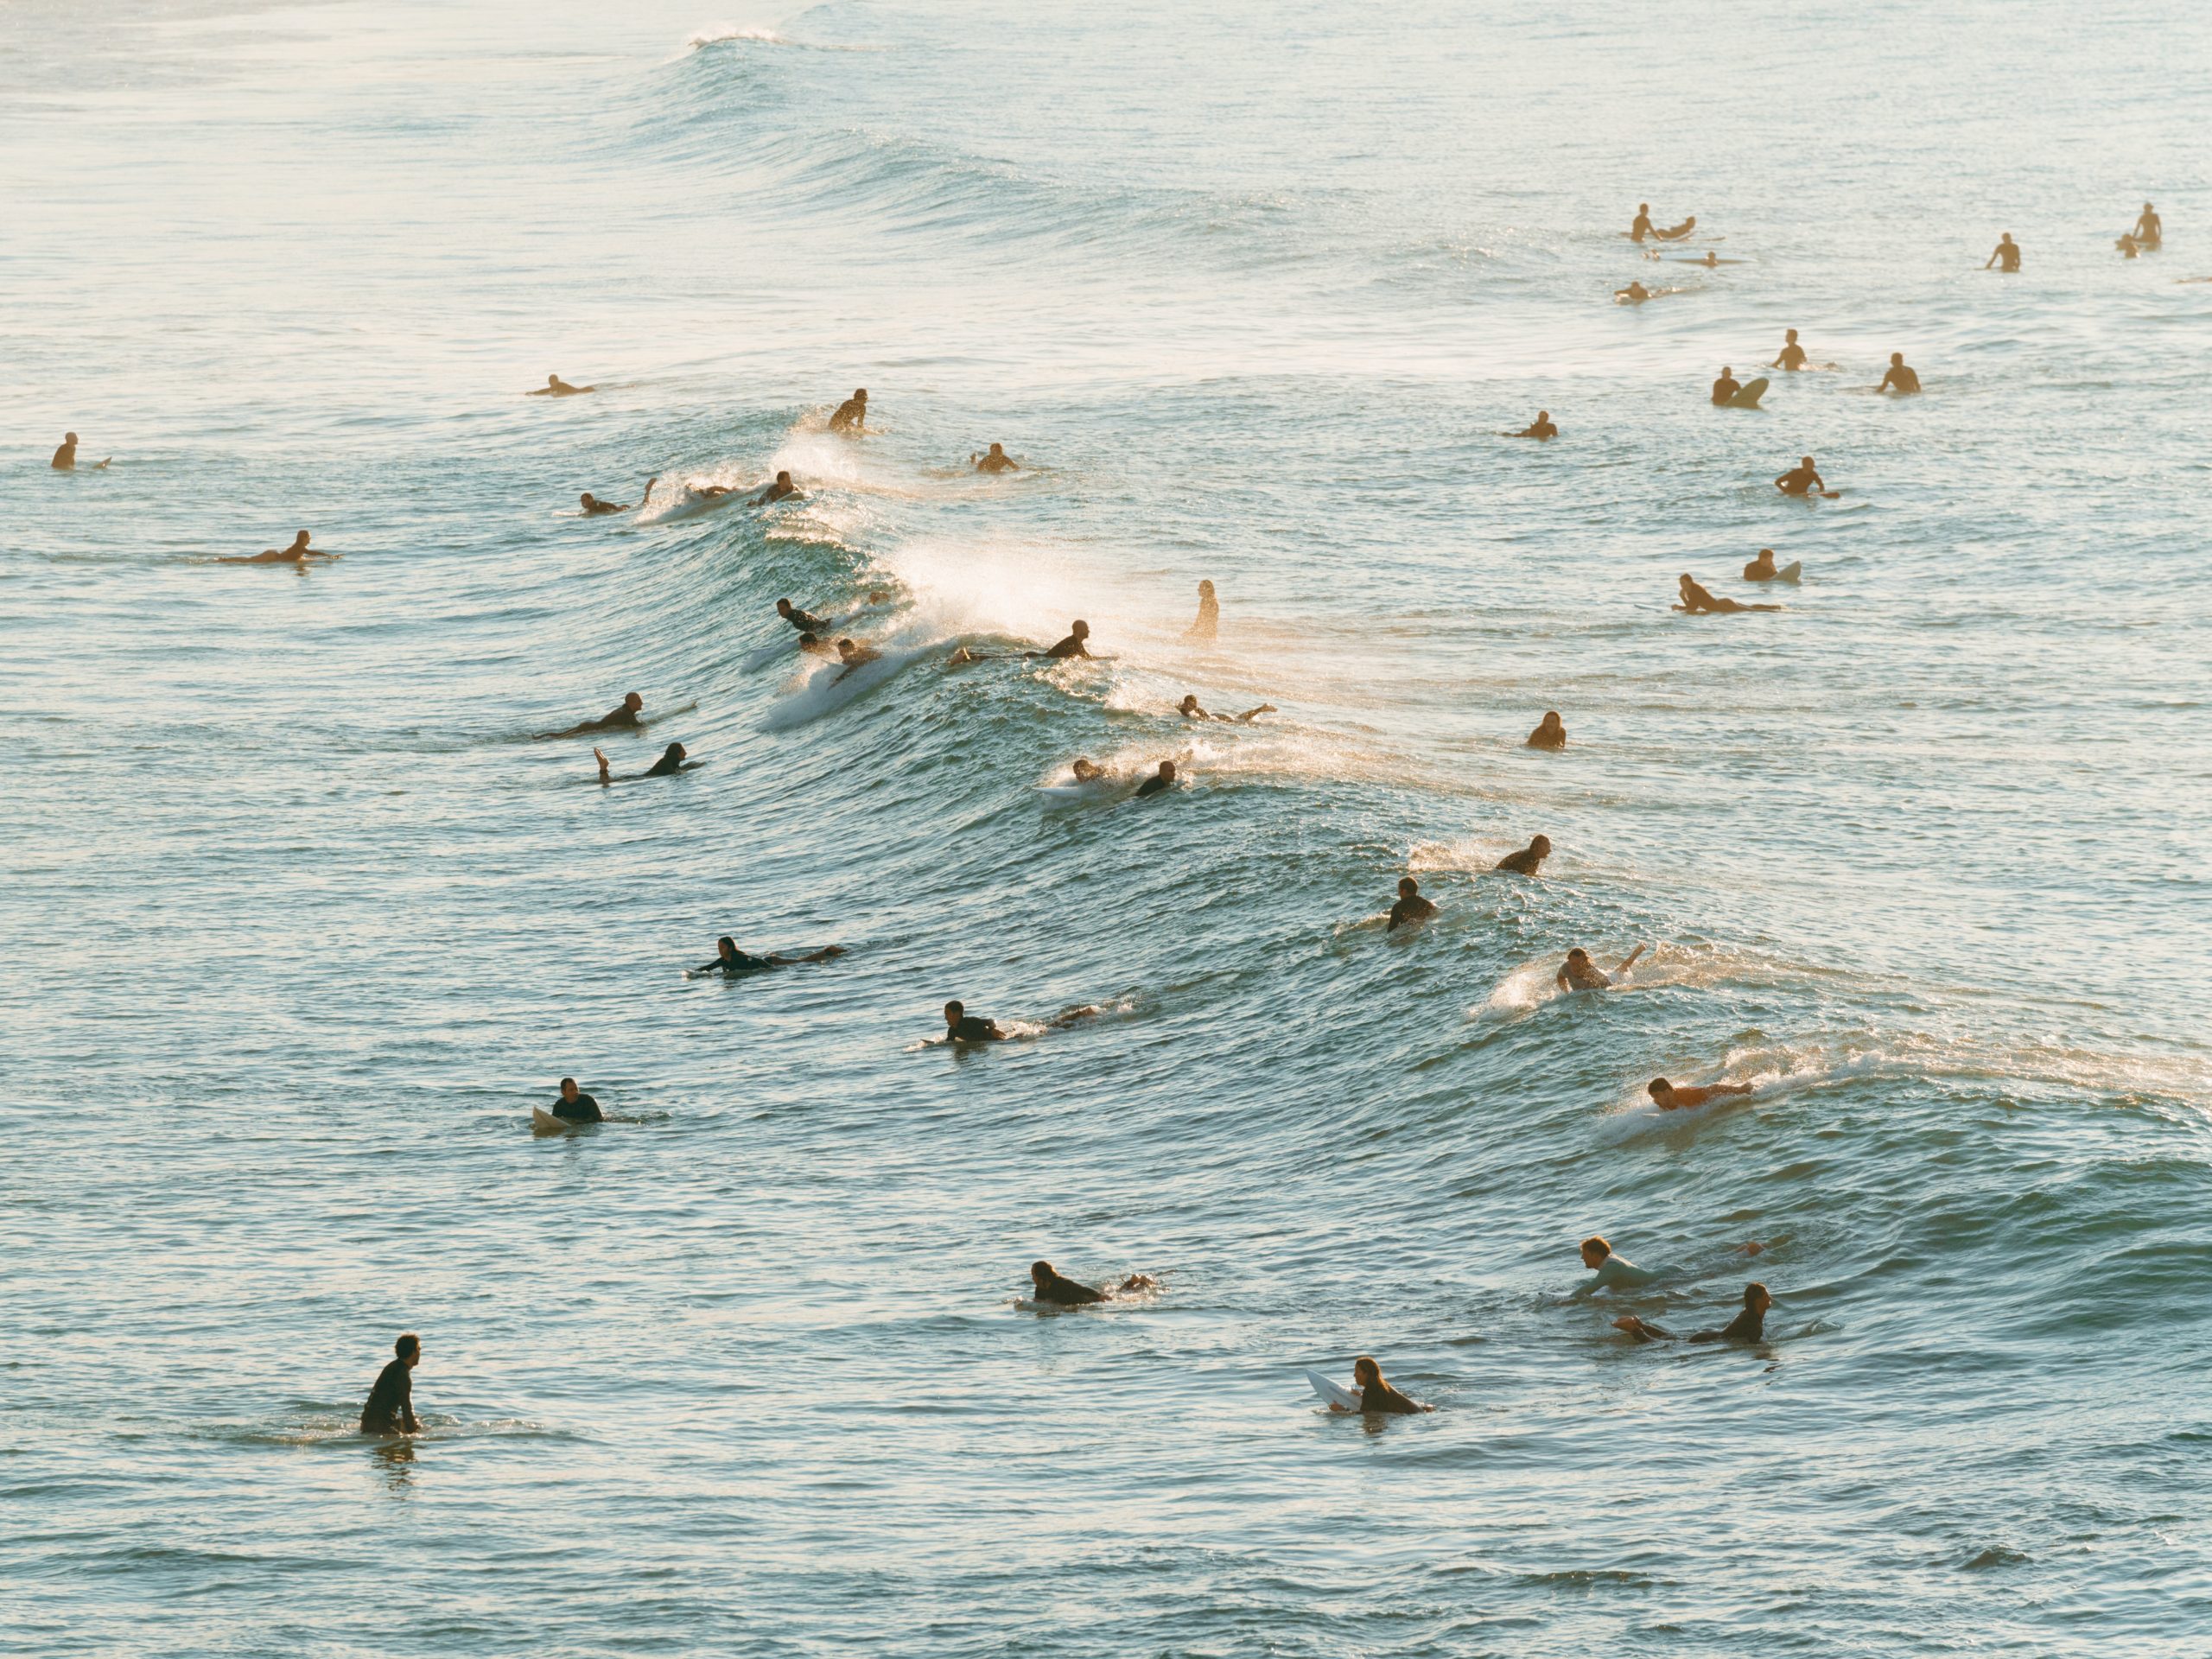 Many surfers and swimmers in waves